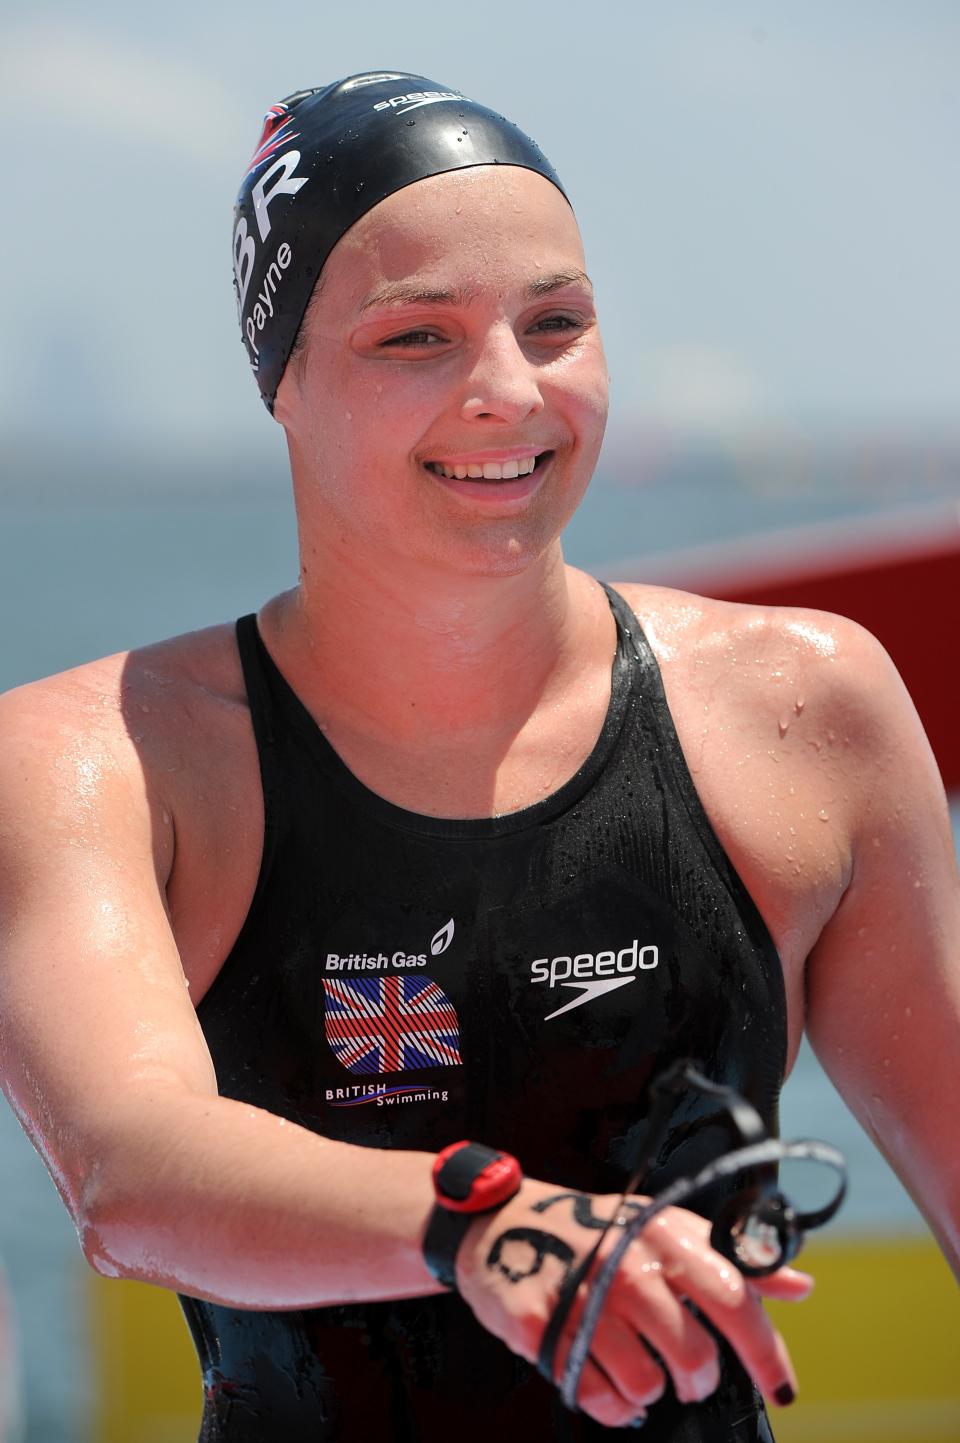 Britain's swimmer Keri-Anne Payne smiles after winning the women's 10km open water swimming event of the FINA World Championships in Shanghai on July 19, 2011. Payne, who took silver at the 2008 Beijing Games, swam the women's 10km open water in 2hr 1min 58.1secs, ramping up hopes for London 2012.  AFP PHOTO/PHILIPPE LOPEZ (Photo credit should read PHILIPPE LOPEZ/AFP/Getty Images)